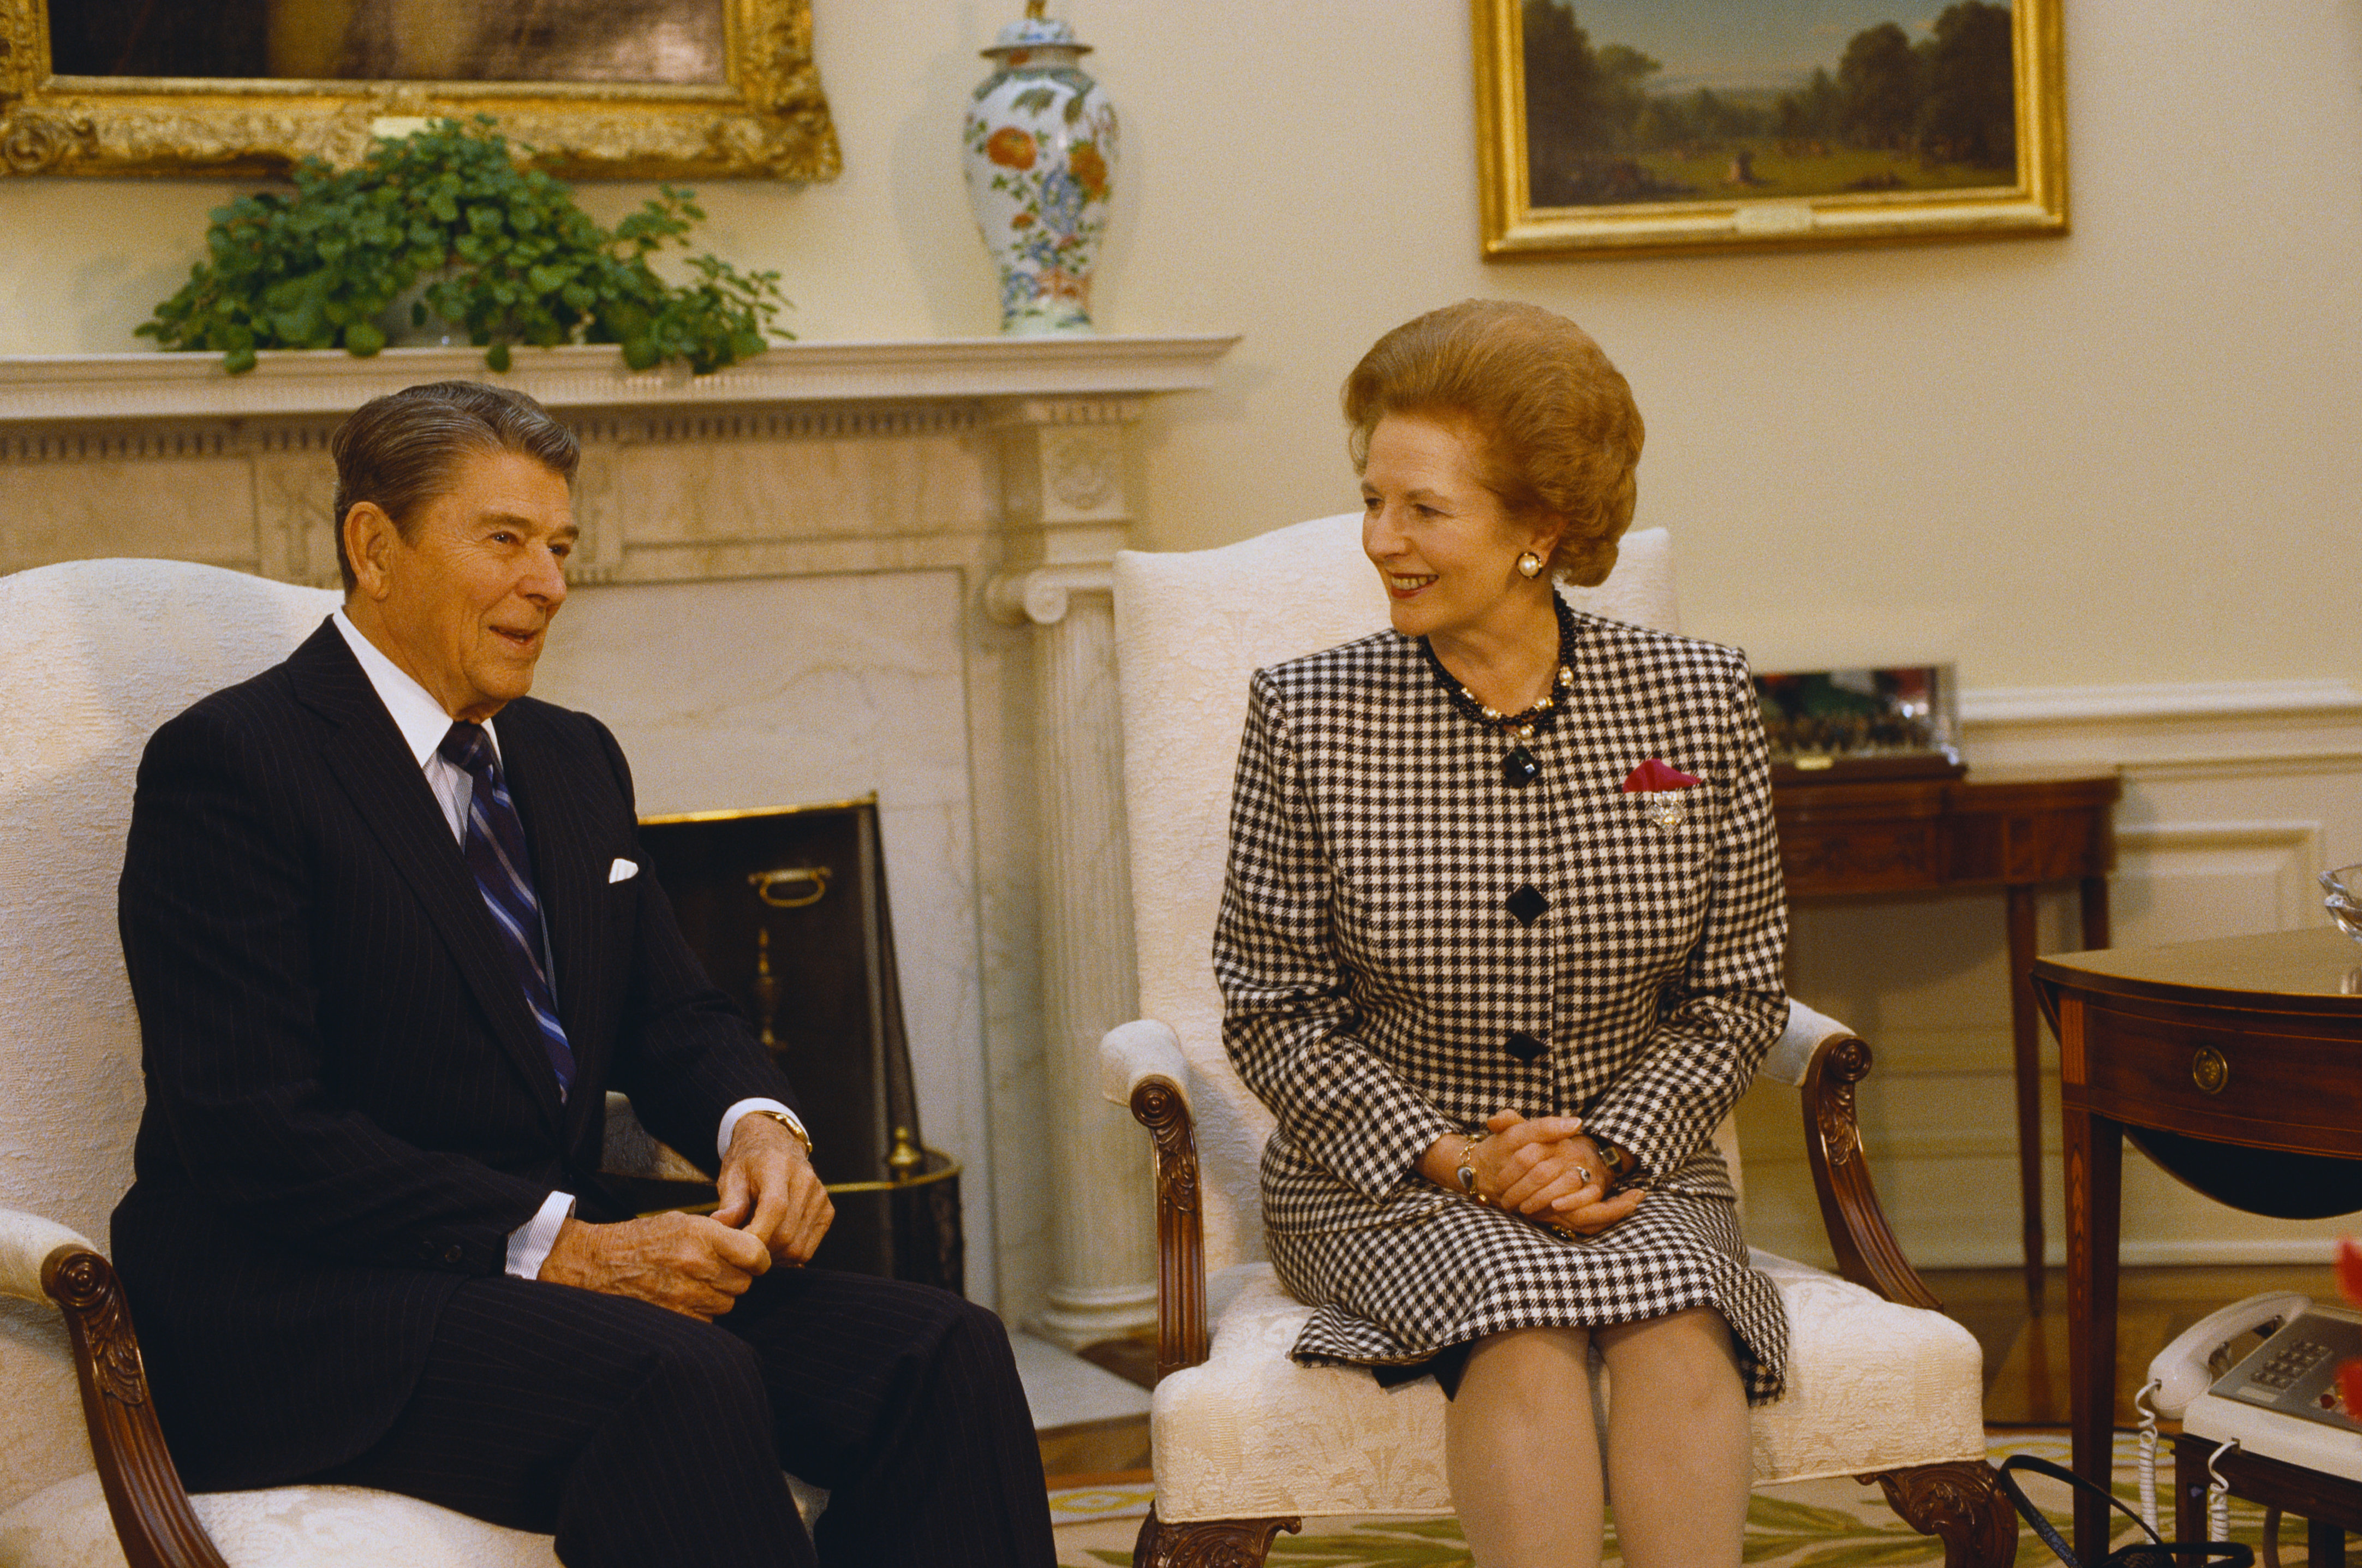 Ronald Reagan and Margaret Thatcher were close when they were both in office in the 1980s. But Thatcher still berated Reagan over the Grenada invasion